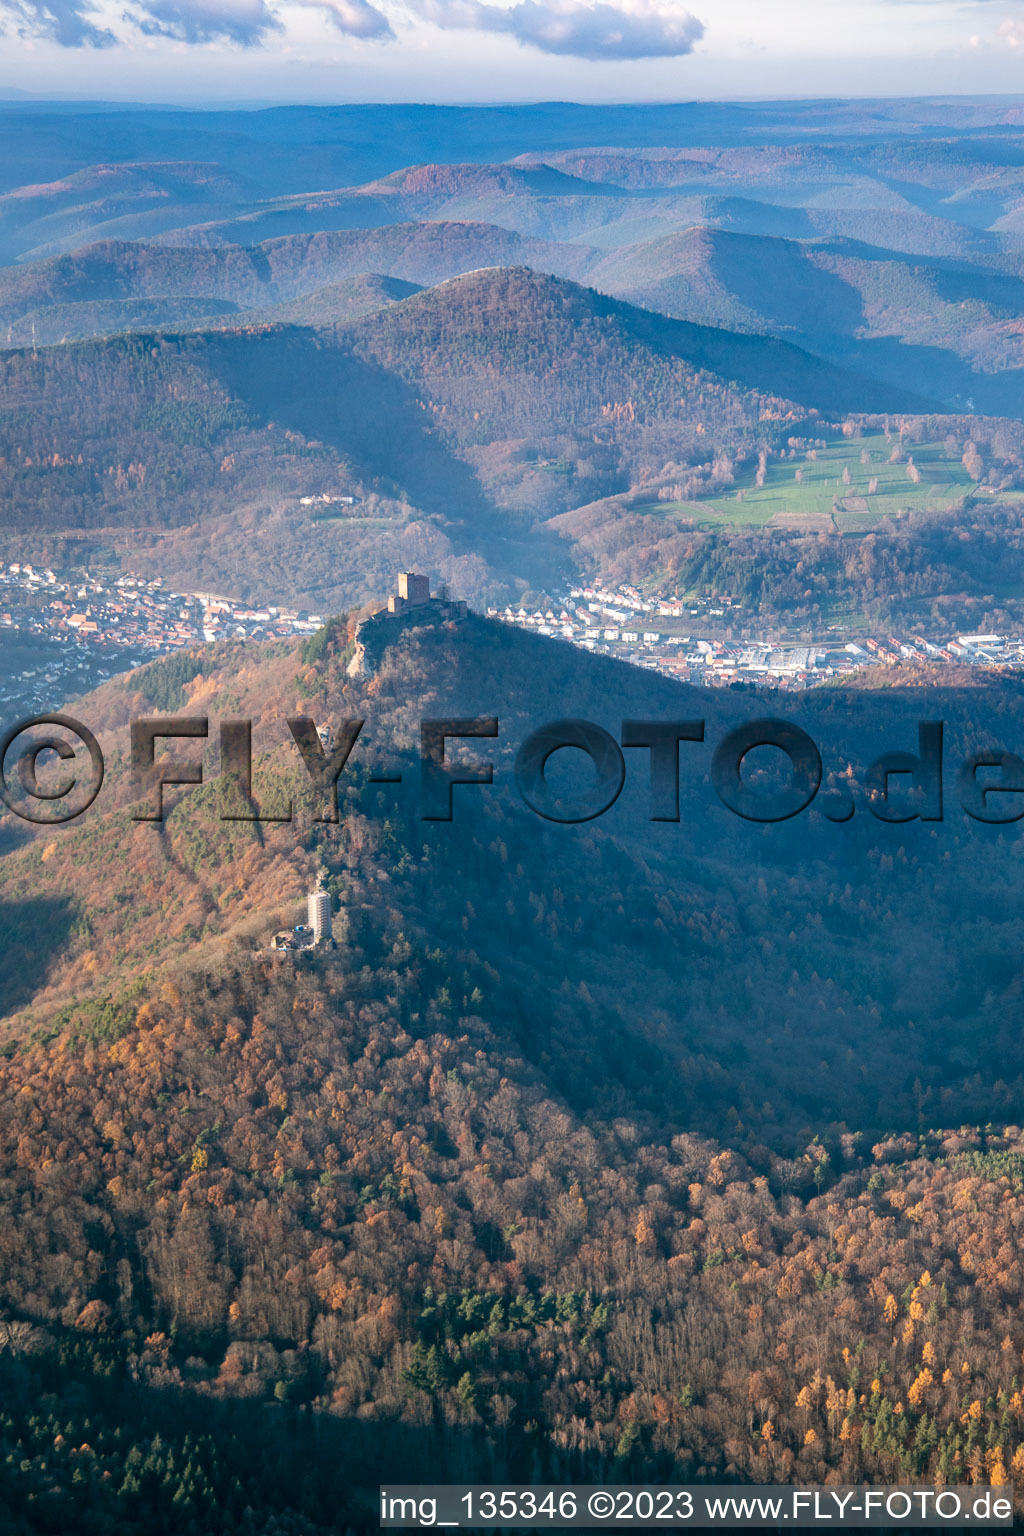 The 3 castles: Münz, Anebos and Trifels from the southeast in the district Bindersbach in Annweiler am Trifels in the state Rhineland-Palatinate, Germany from above